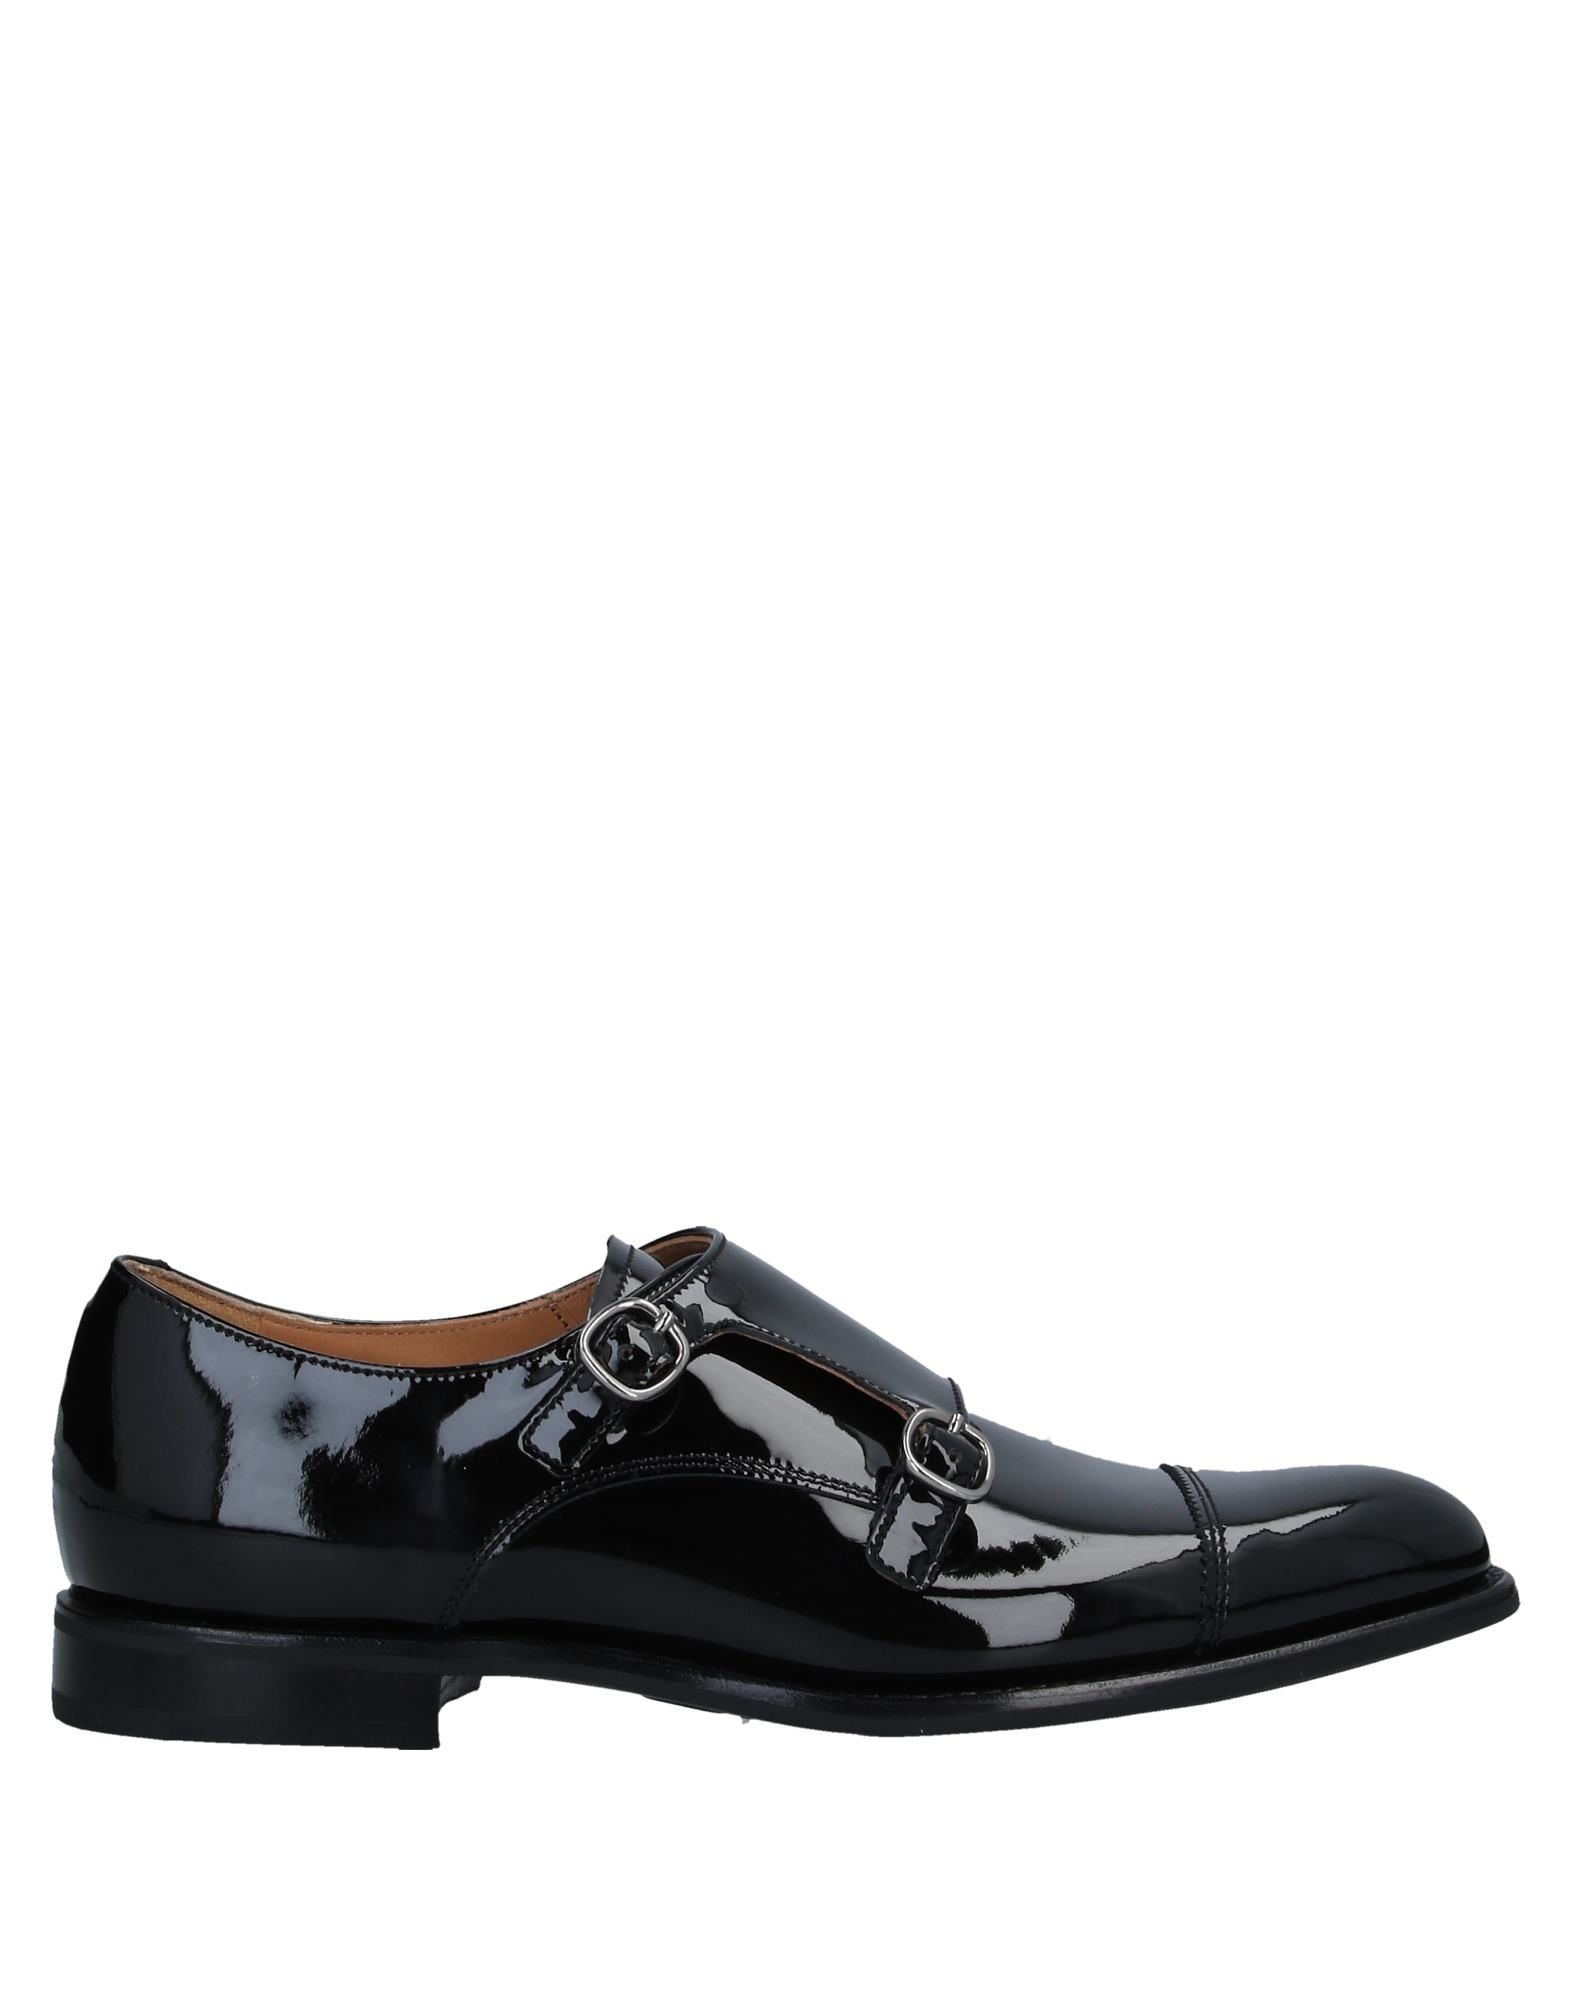 CHURCH'S Loafers - Item 11875633